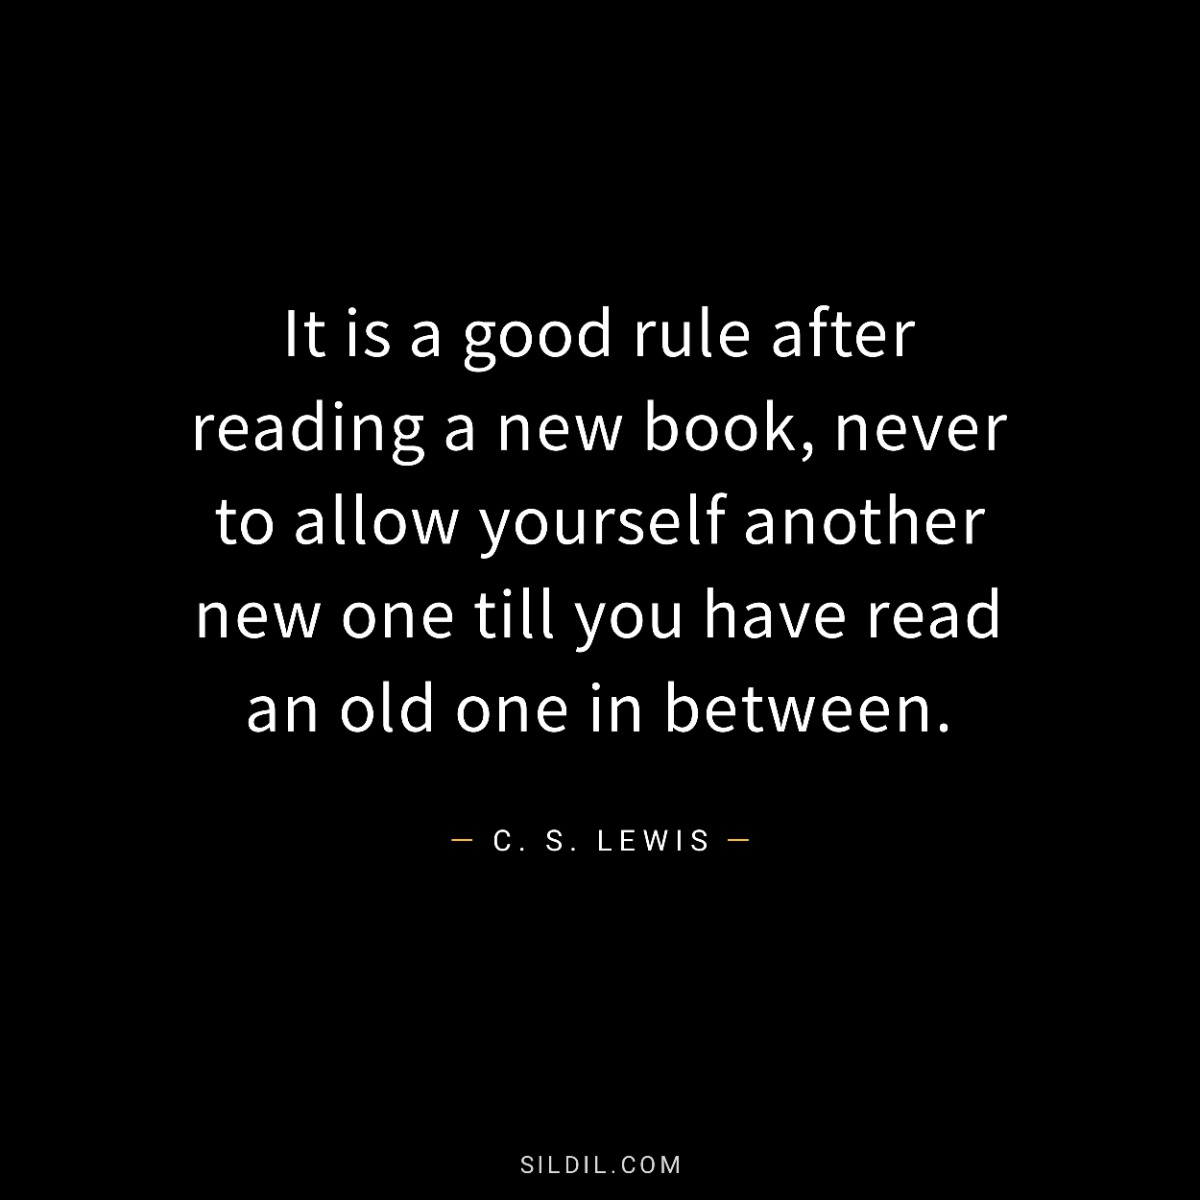 It is a good rule after reading a new book, never to allow yourself another new one till you have read an old one in between.